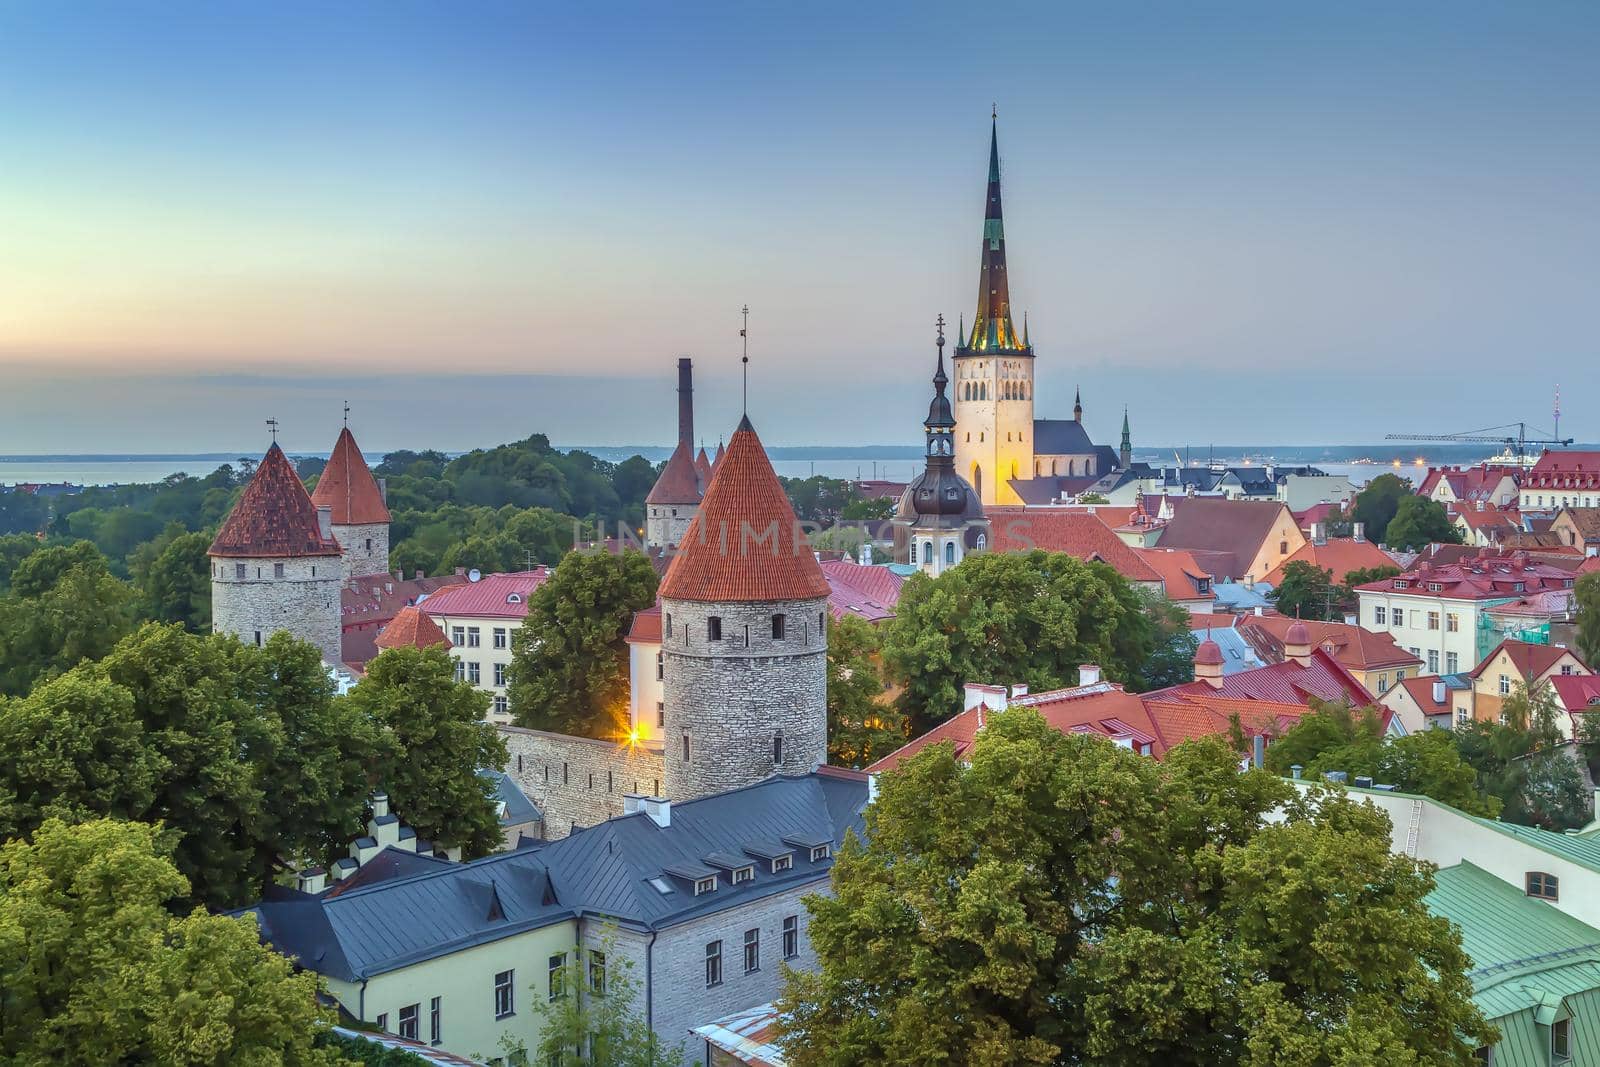 View of Walls of Tallinn and St. Olaf Church from Toompea hill in evening, Estonia